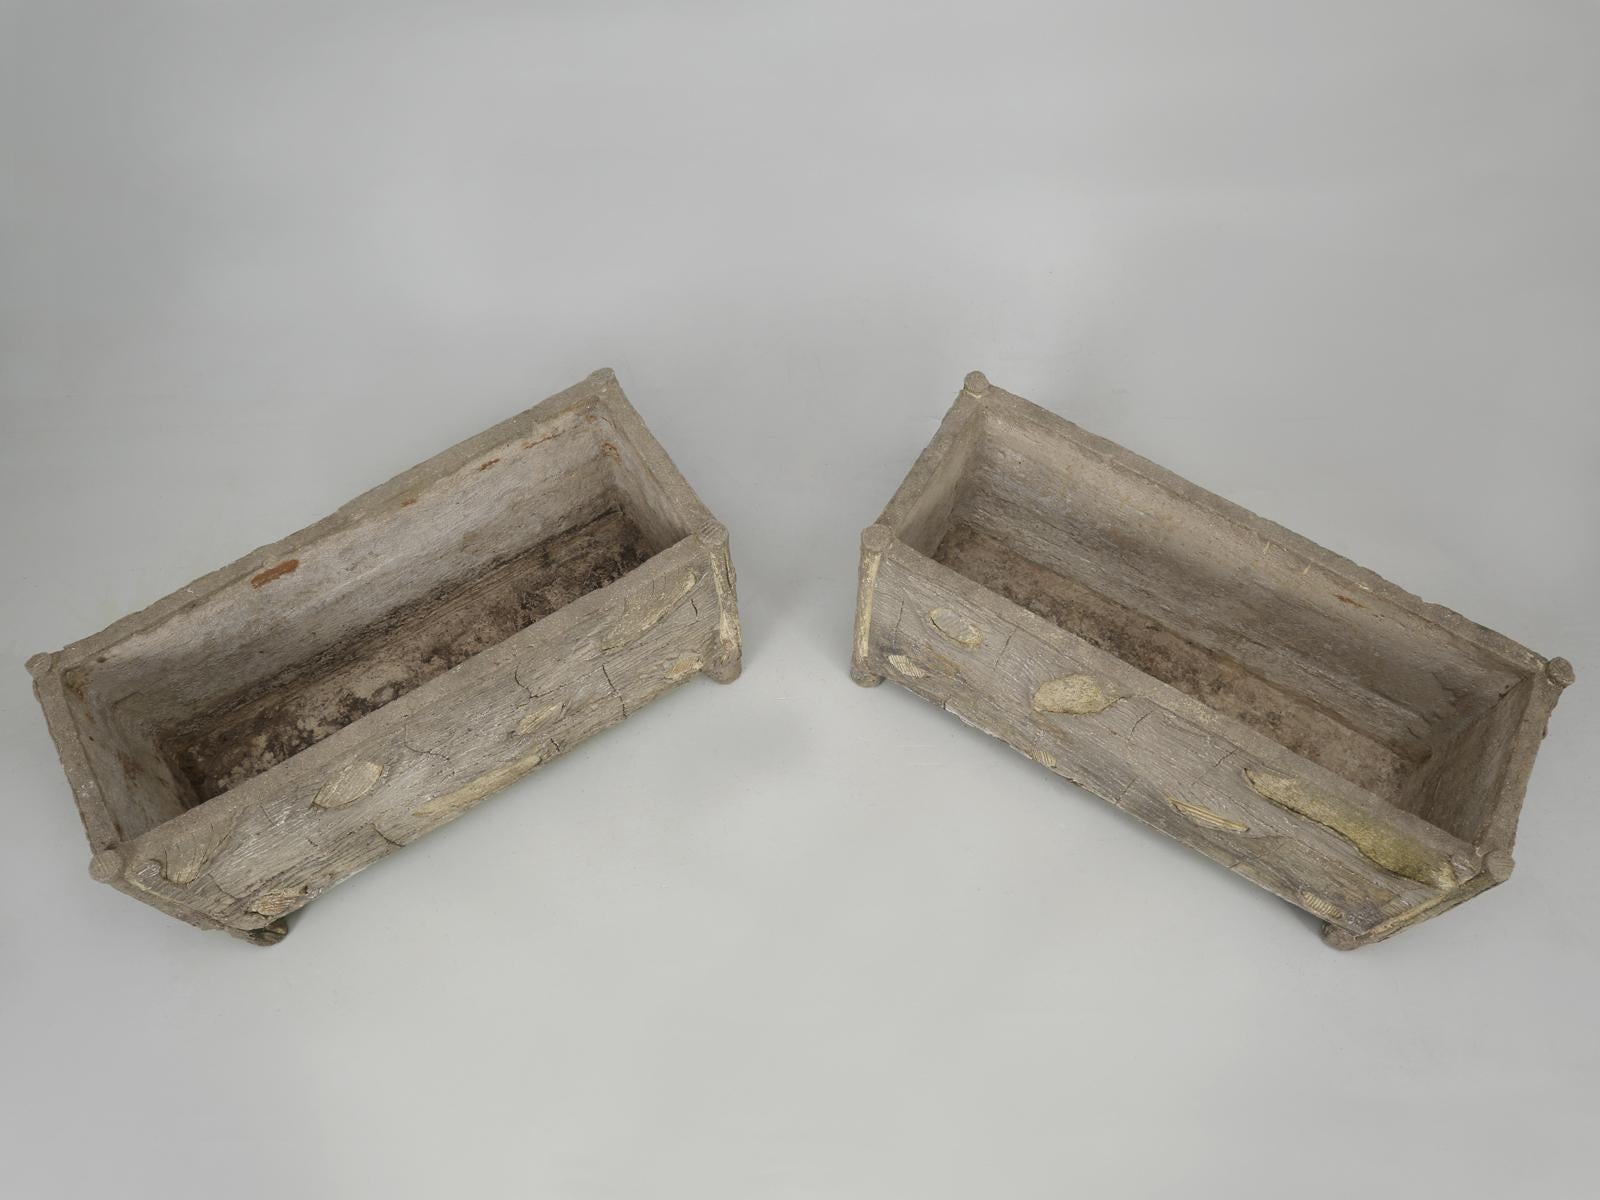 Rare pair of French garden troughs, or planters, in “Faux Bois”, or false wood; the imitation of wood grain and textures. The faux bois technique was created in France and the artisan’s, who created the faux bois, were referred to as, rocailleurs.